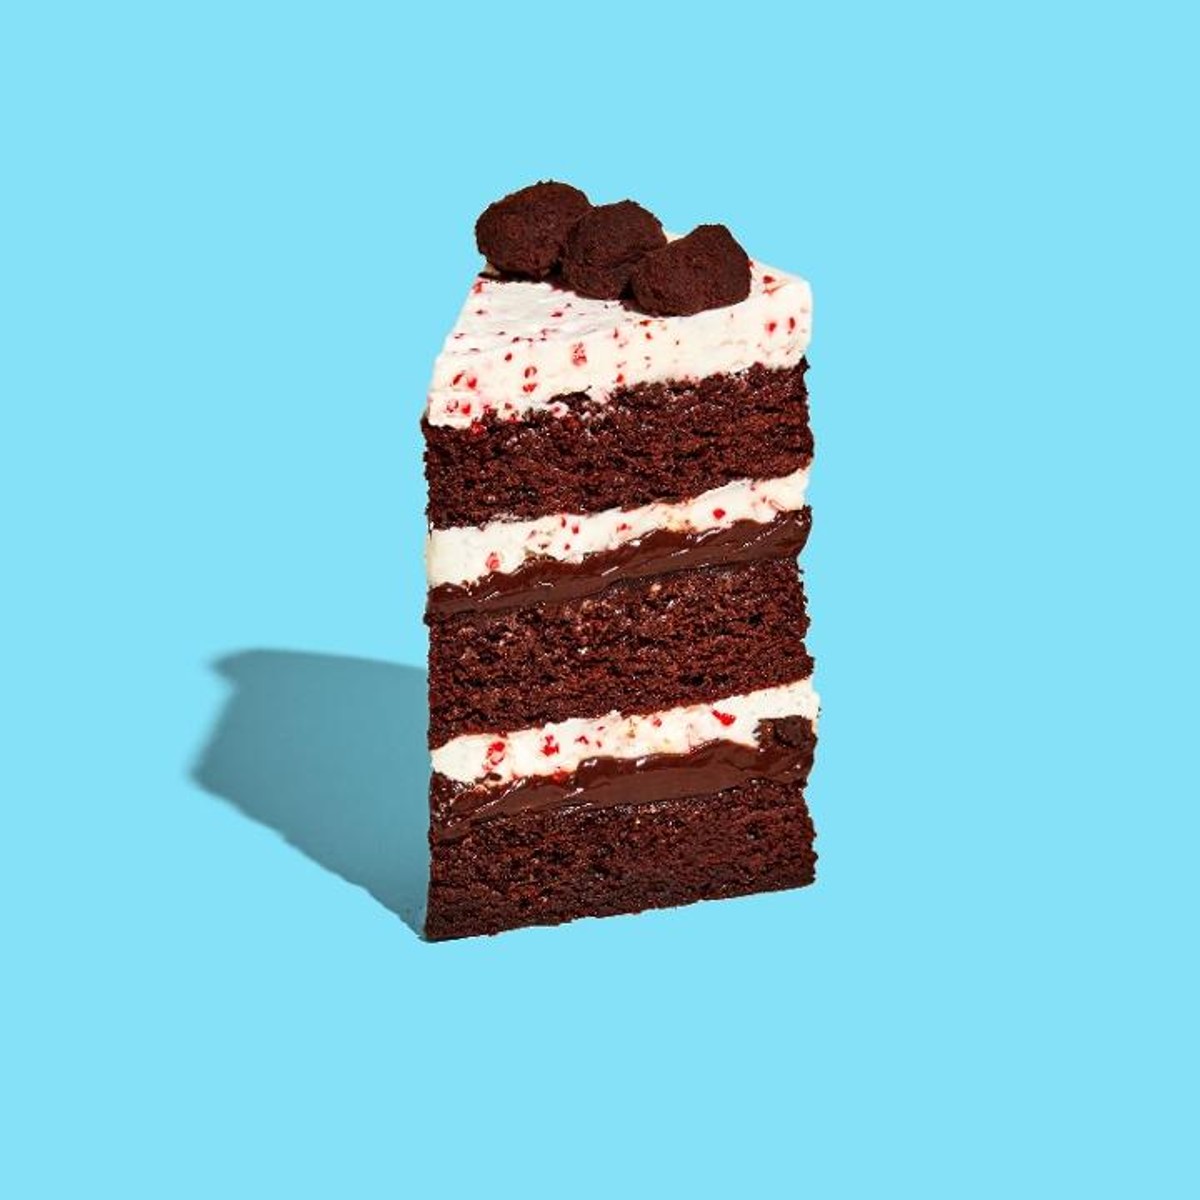 Milk Bar NYC Flagship - Cakes, Cookies & Desserts Plus Delivery